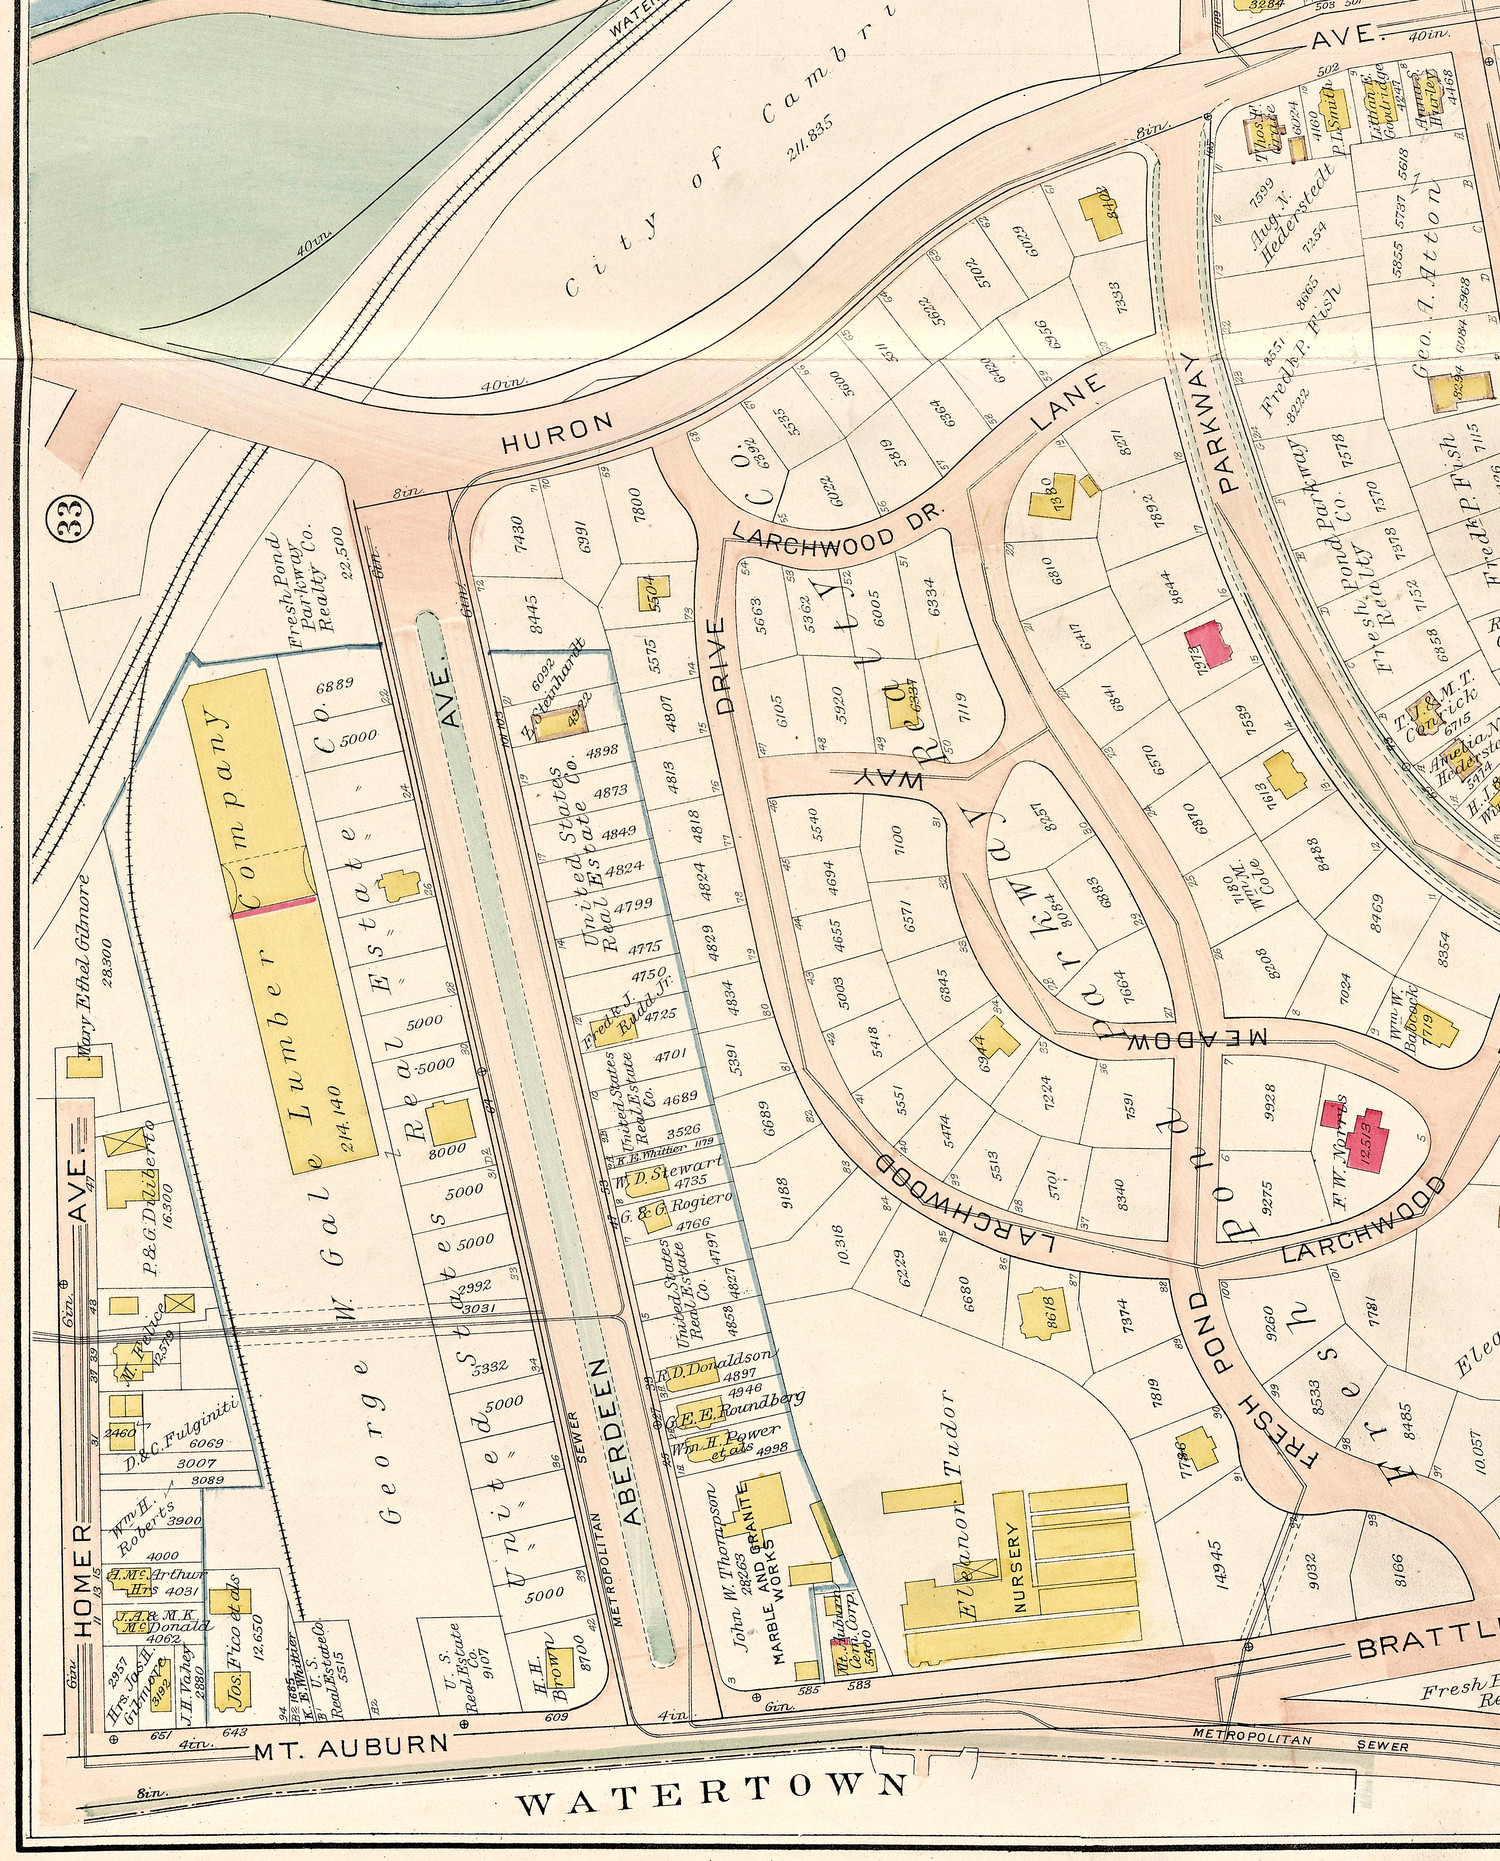 1916 Cambridge atlas showing Aberdeen Avenue and the new lumber shed.